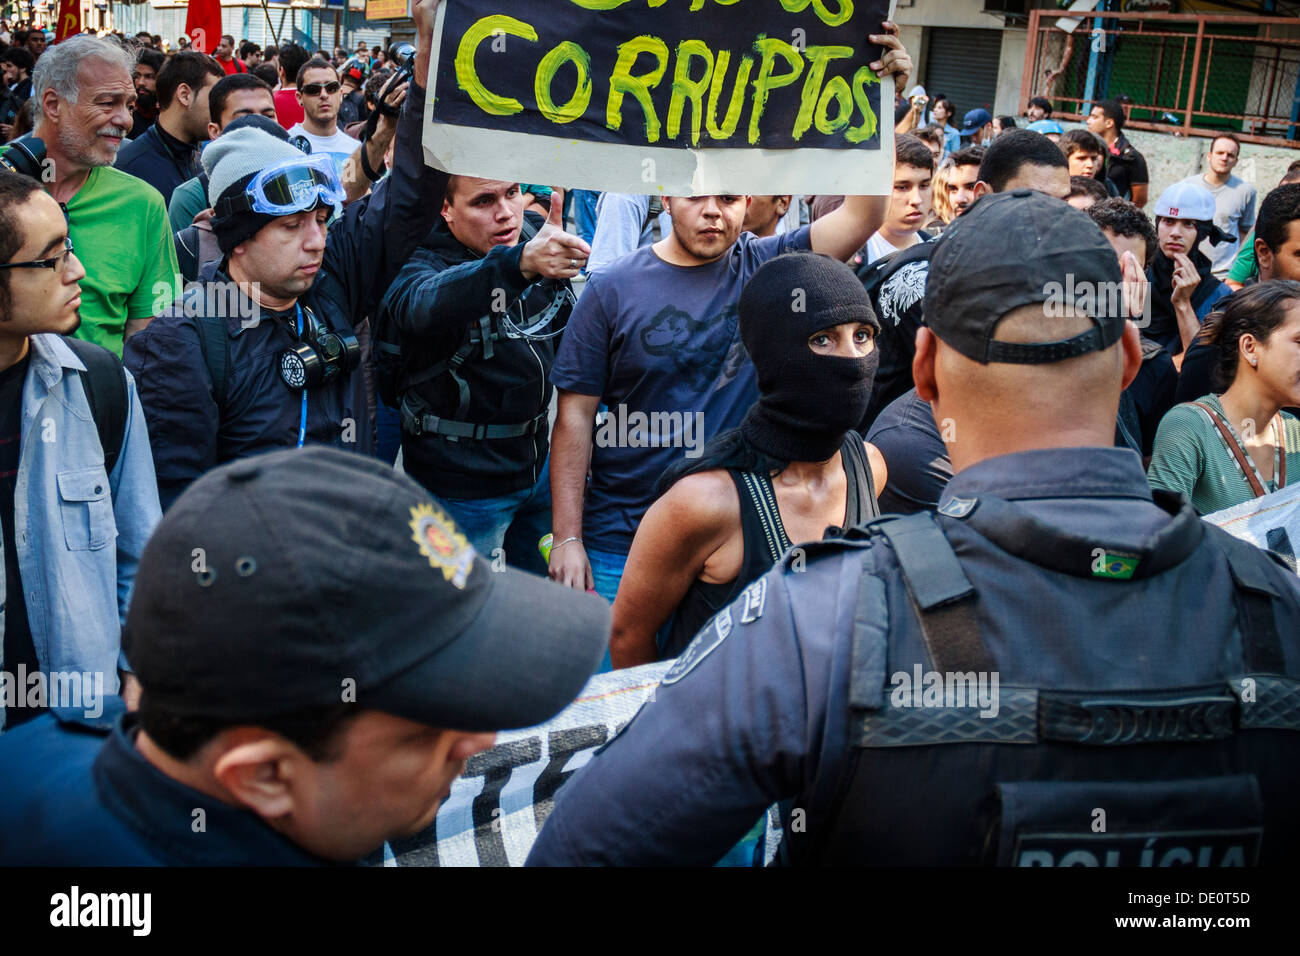 Protest during September 7 - Independence of Brazil - ends in violence and police brutality. Elderly man gets hit and falls Stock Photo